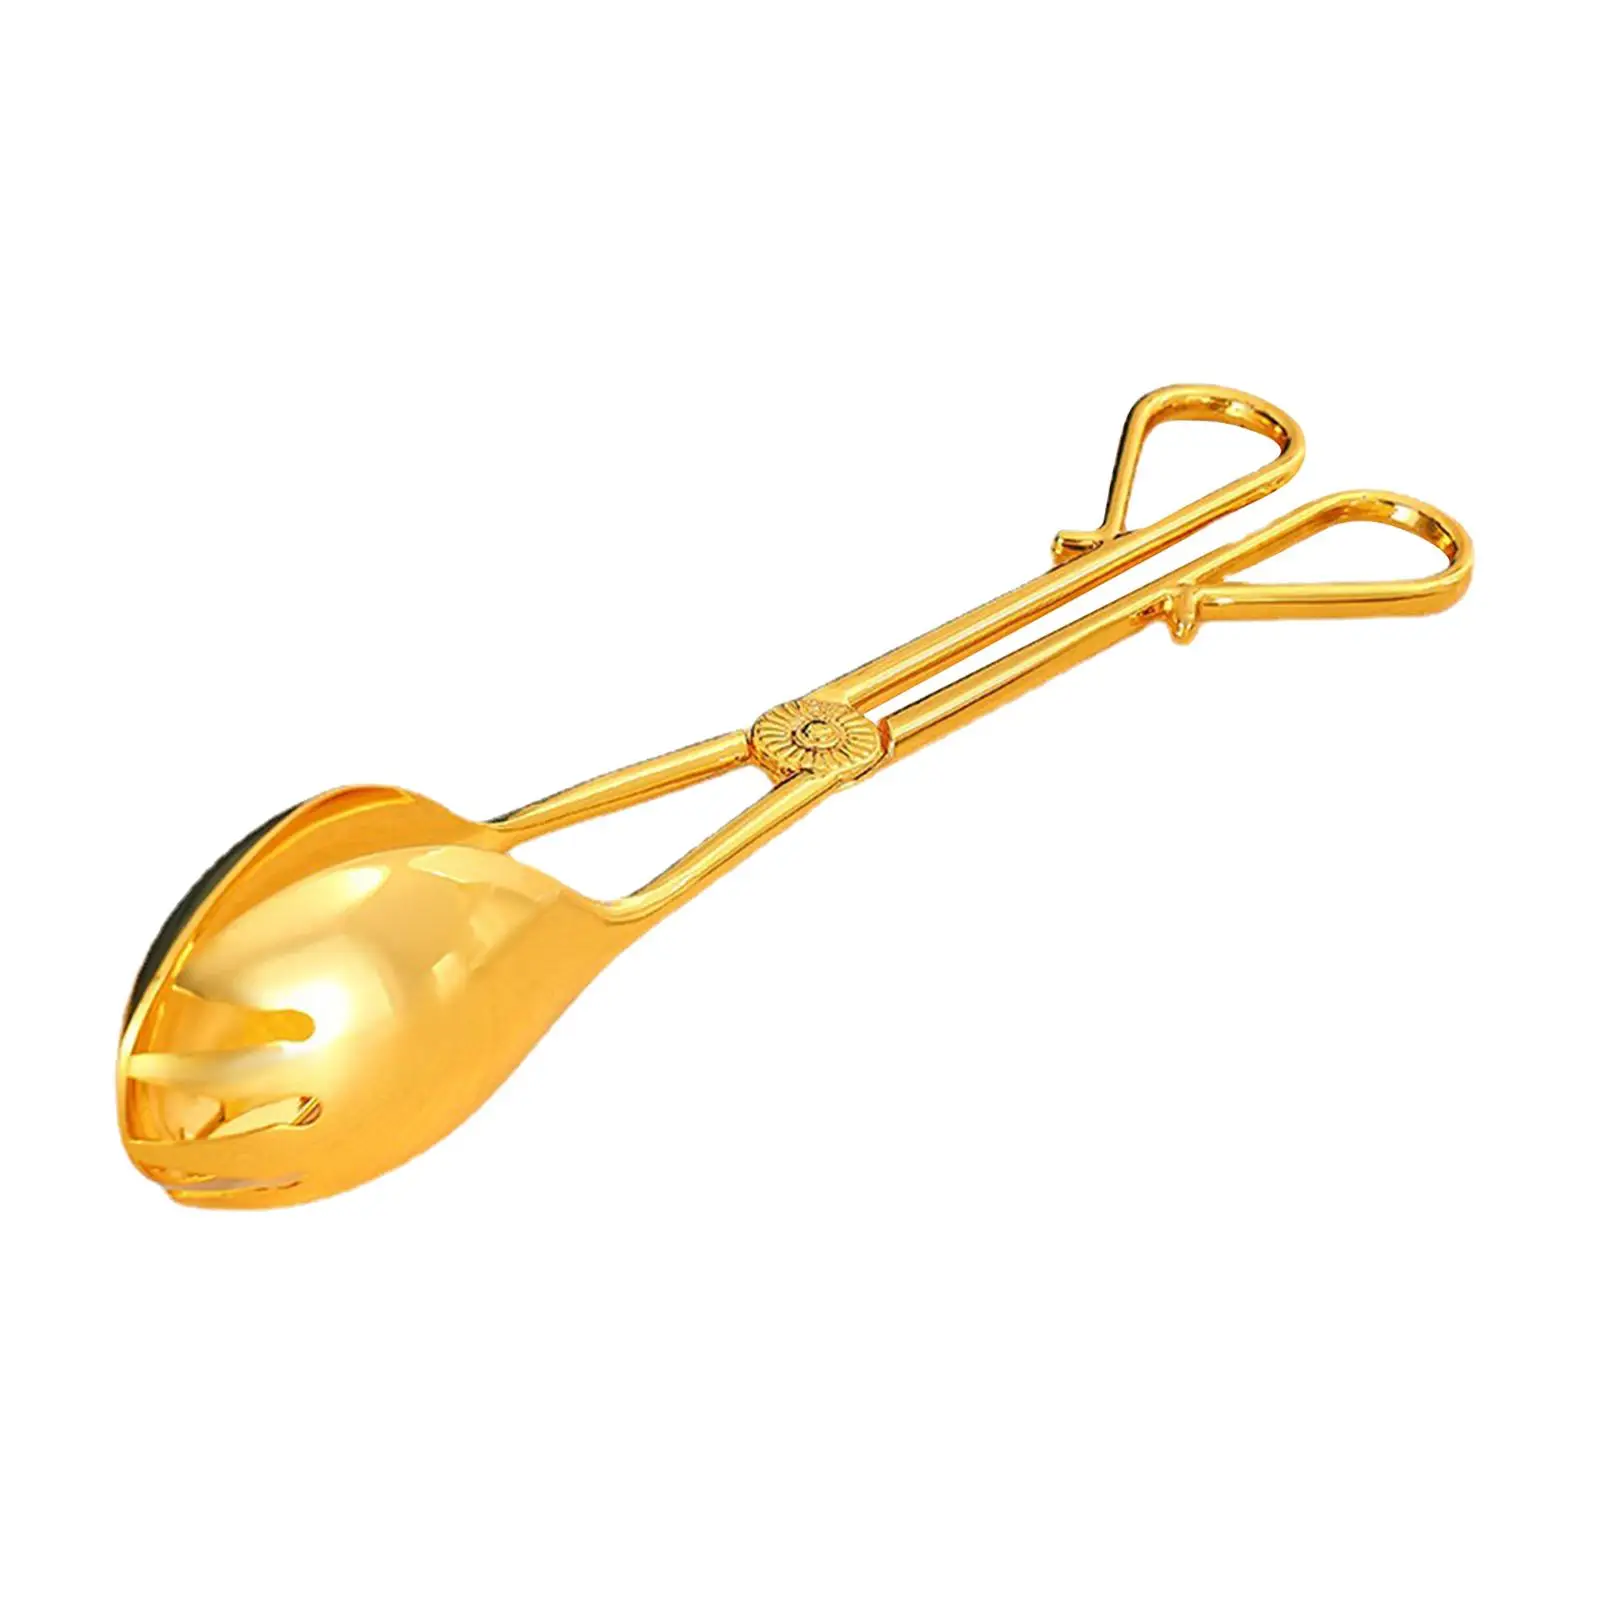 Serving Tongs Durable BBQ Clips for Cooking Catering Wedding Celebrations